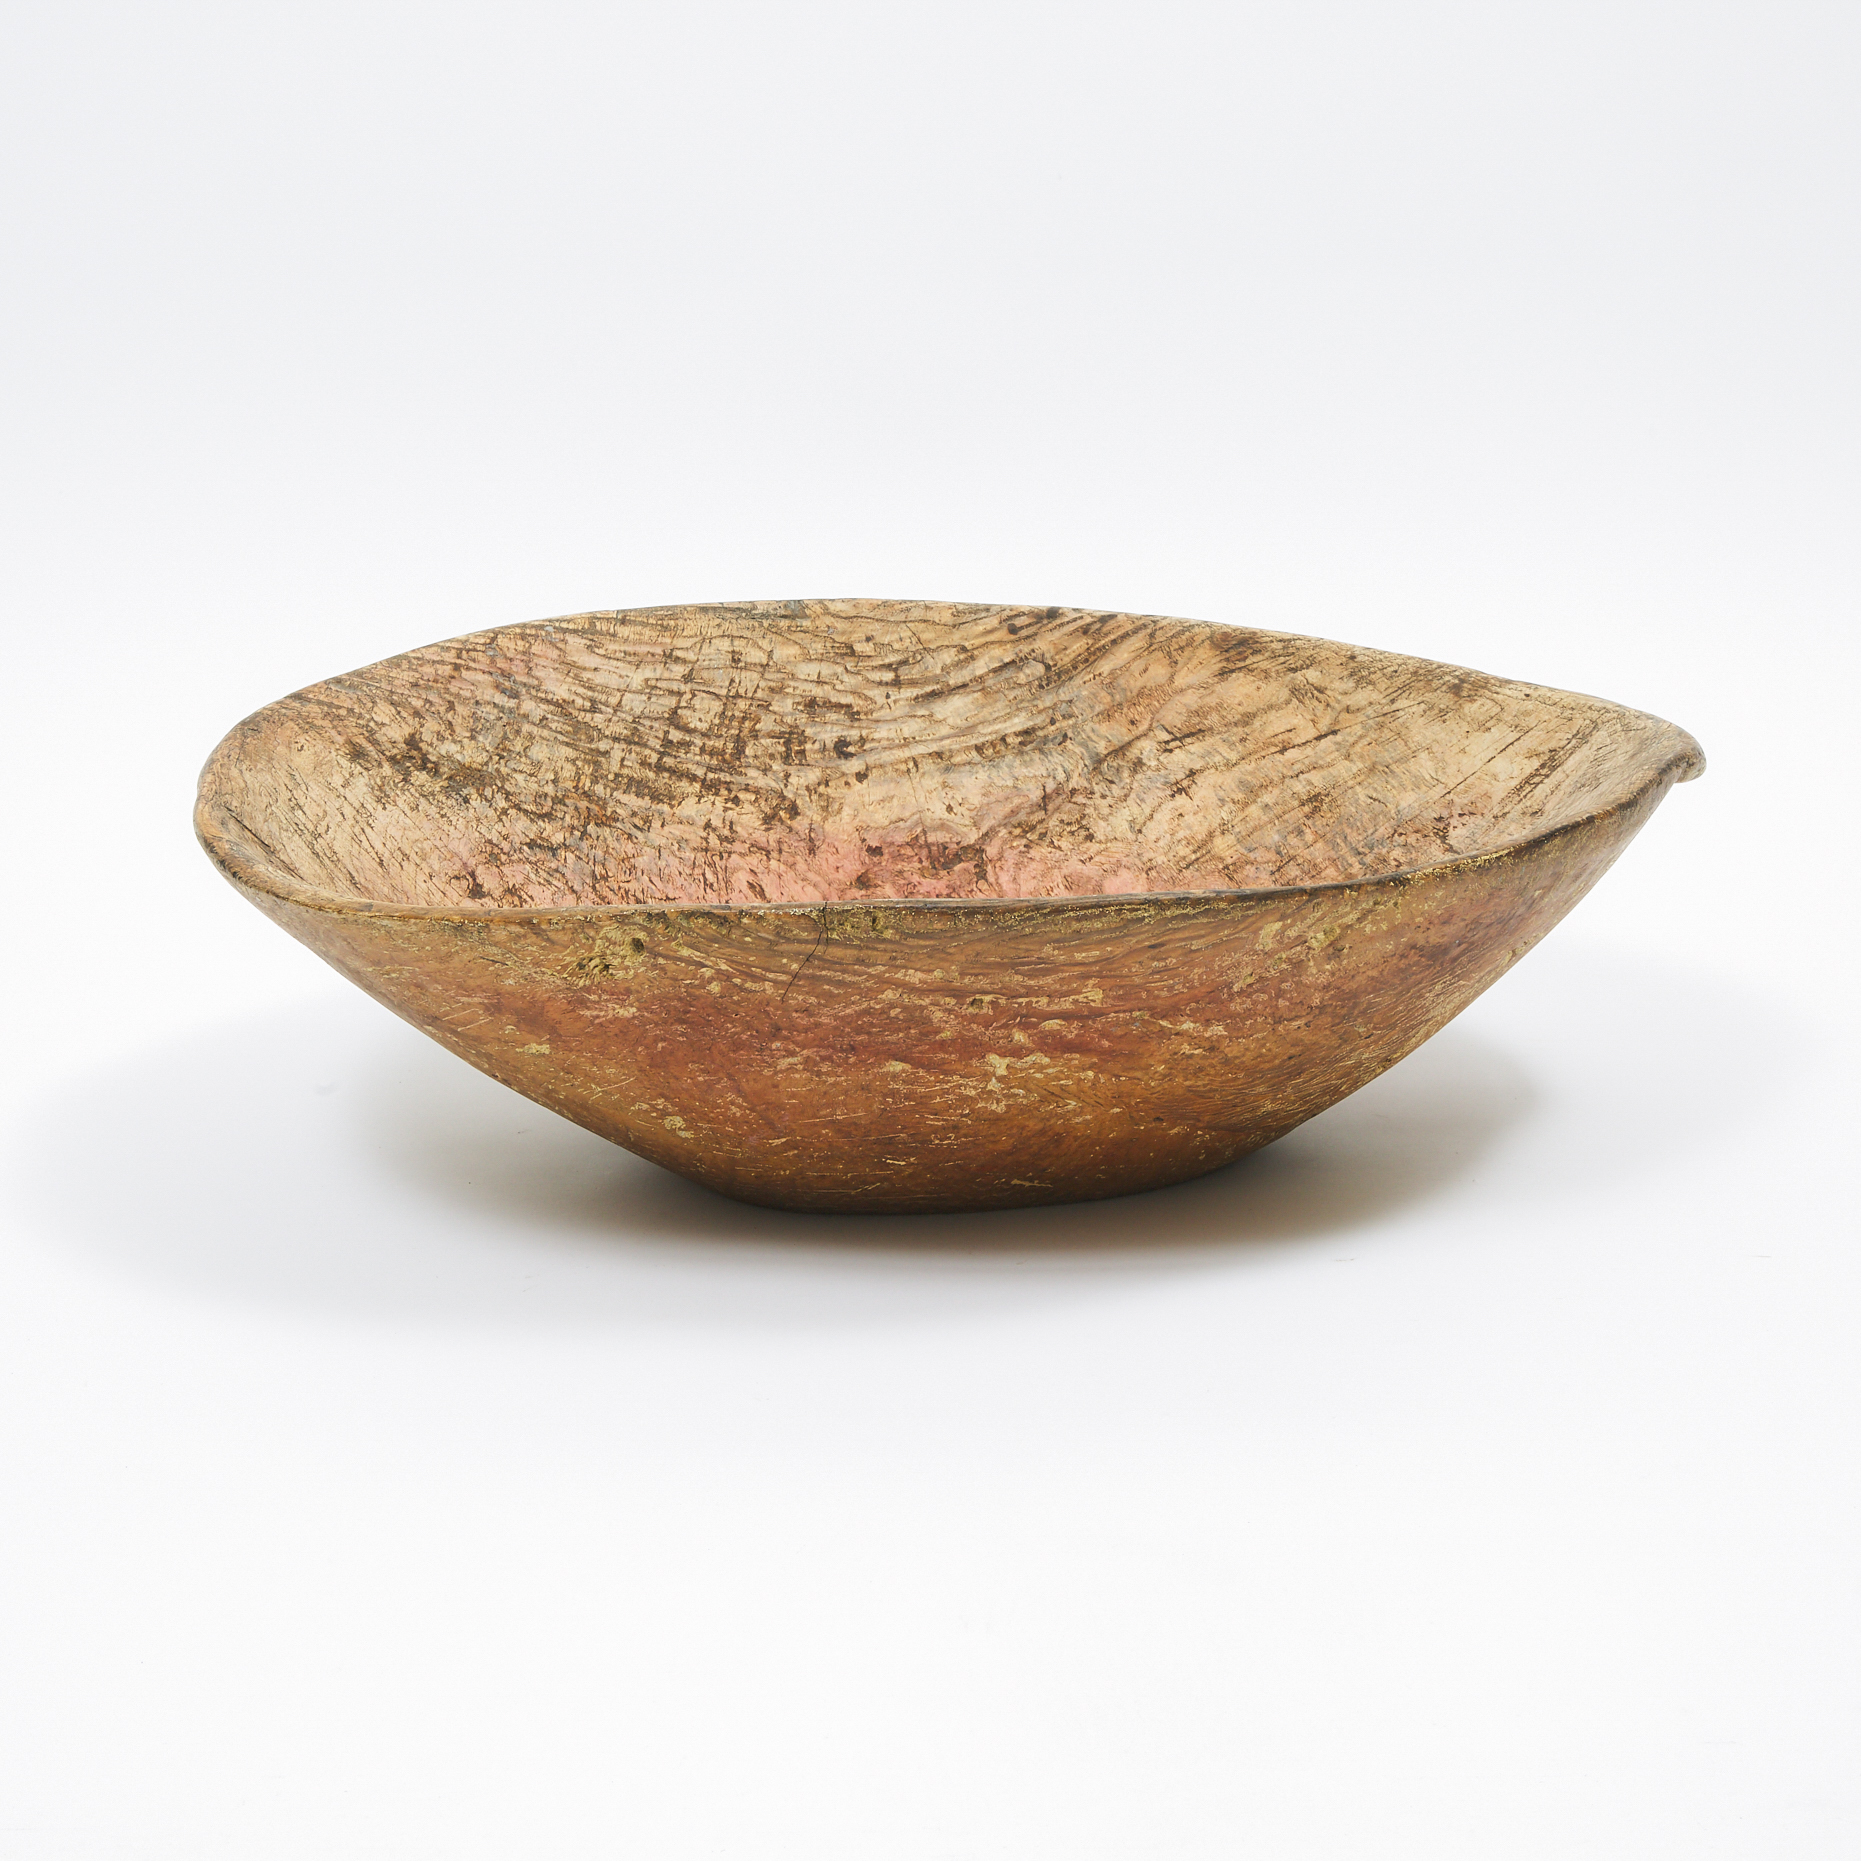 Large Eastern Woodlands Burl Bowl, early 19th century